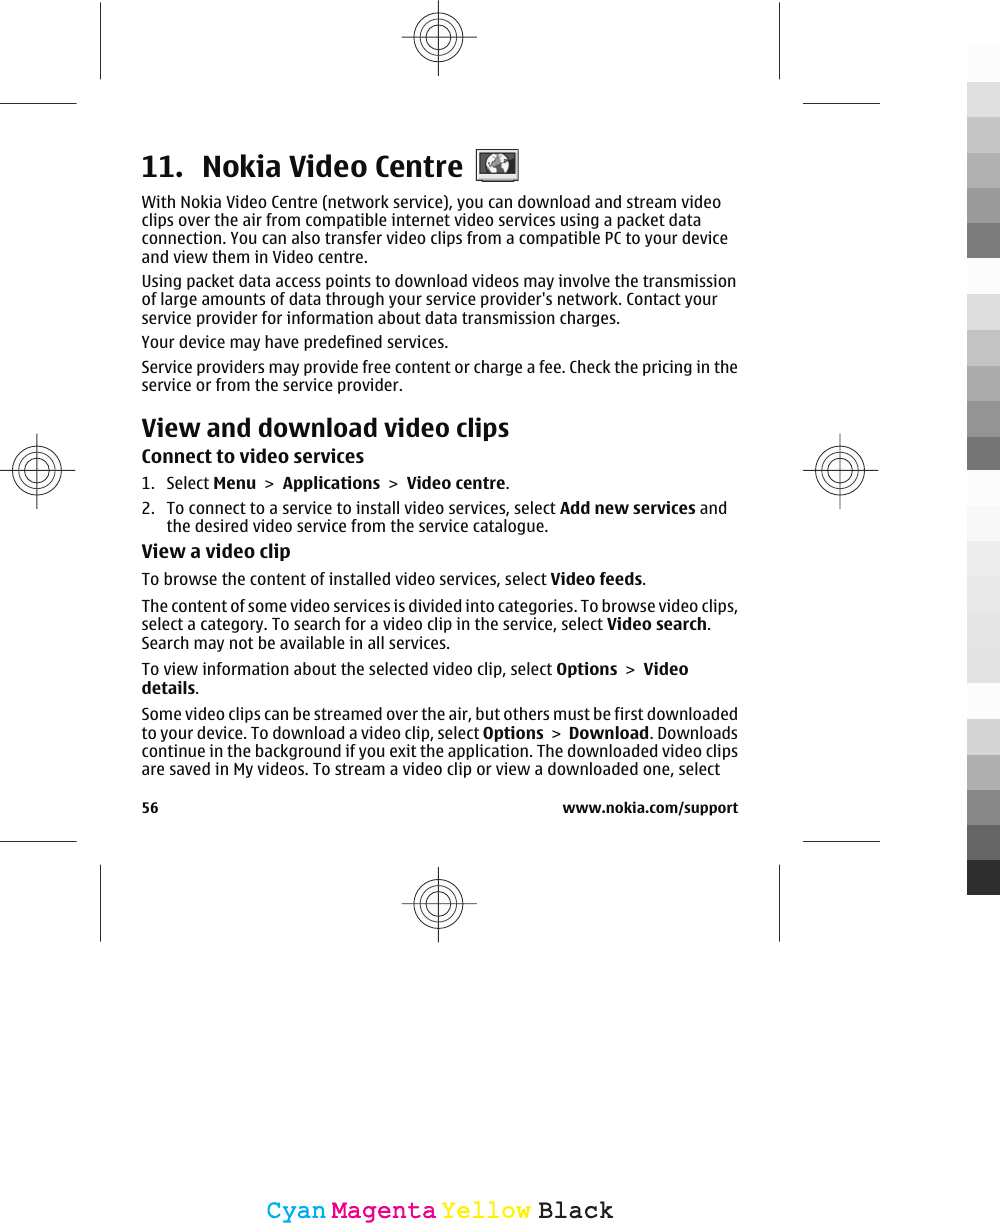 11. Nokia Video CentreWith Nokia Video Centre (network service), you can download and stream videoclips over the air from compatible internet video services using a packet dataconnection. You can also transfer video clips from a compatible PC to your deviceand view them in Video centre.Using packet data access points to download videos may involve the transmissionof large amounts of data through your service provider&apos;s network. Contact yourservice provider for information about data transmission charges.Your device may have predefined services.Service providers may provide free content or charge a fee. Check the pricing in theservice or from the service provider.View and download video clipsConnect to video services1. Select Menu &gt; Applications &gt; Video centre.2. To connect to a service to install video services, select Add new services andthe desired video service from the service catalogue.View a video clipTo browse the content of installed video services, select Video feeds.The content of some video services is divided into categories. To browse video clips,select a category. To search for a video clip in the service, select Video search.Search may not be available in all services.To view information about the selected video clip, select Options &gt; Videodetails.Some video clips can be streamed over the air, but others must be first downloadedto your device. To download a video clip, select Options &gt; Download. Downloadscontinue in the background if you exit the application. The downloaded video clipsare saved in My videos. To stream a video clip or view a downloaded one, select56 www.nokia.com/supportCyanCyanMagentaMagentaYellowYellowBlackBlack